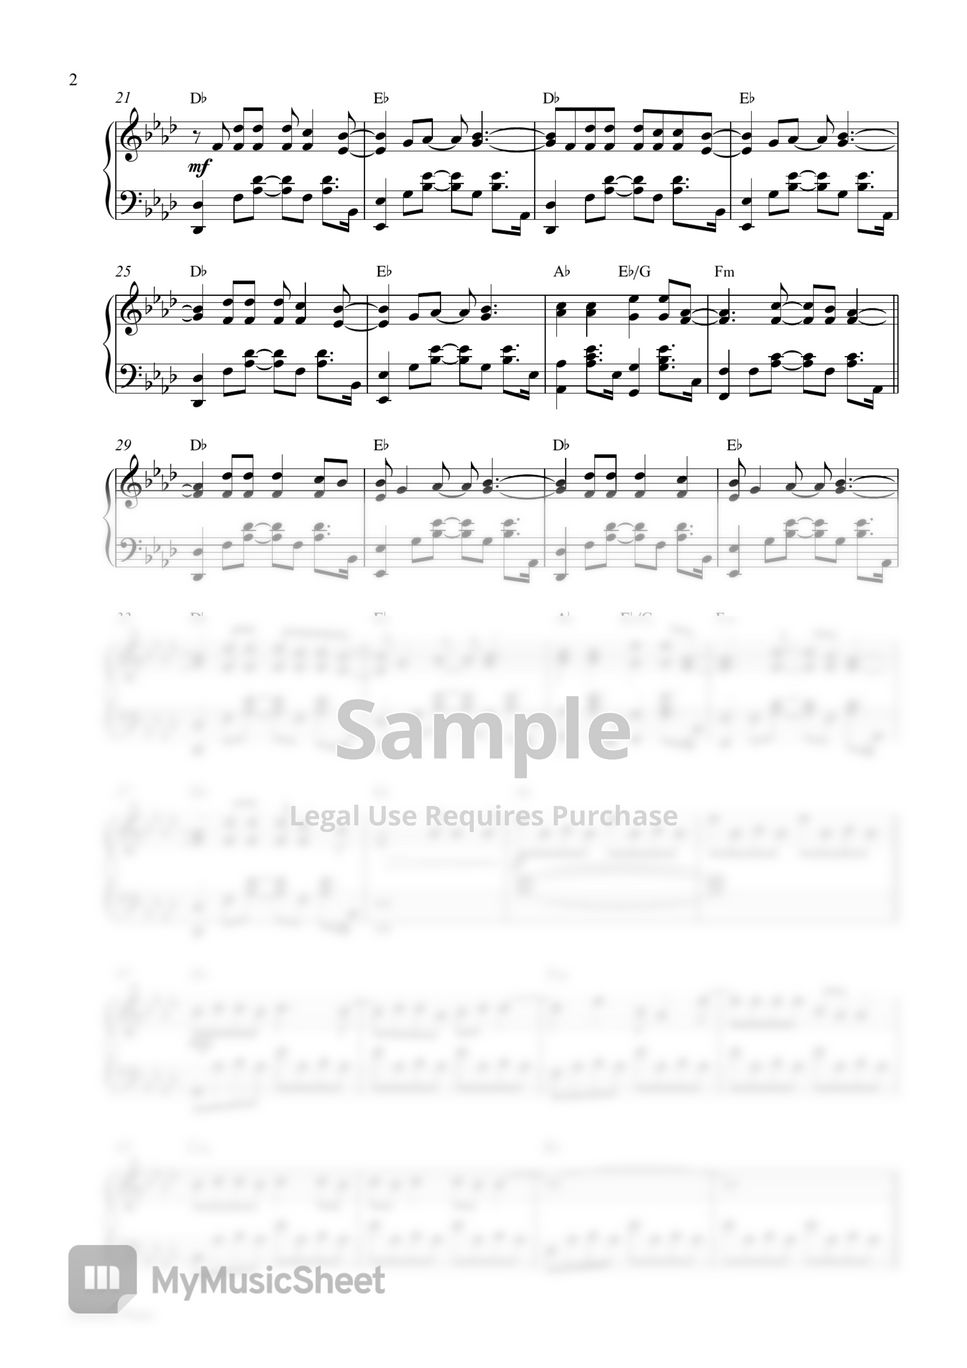 One Direction - Night Changes (Piano Sheet Music) Sheets by Pianella Piano